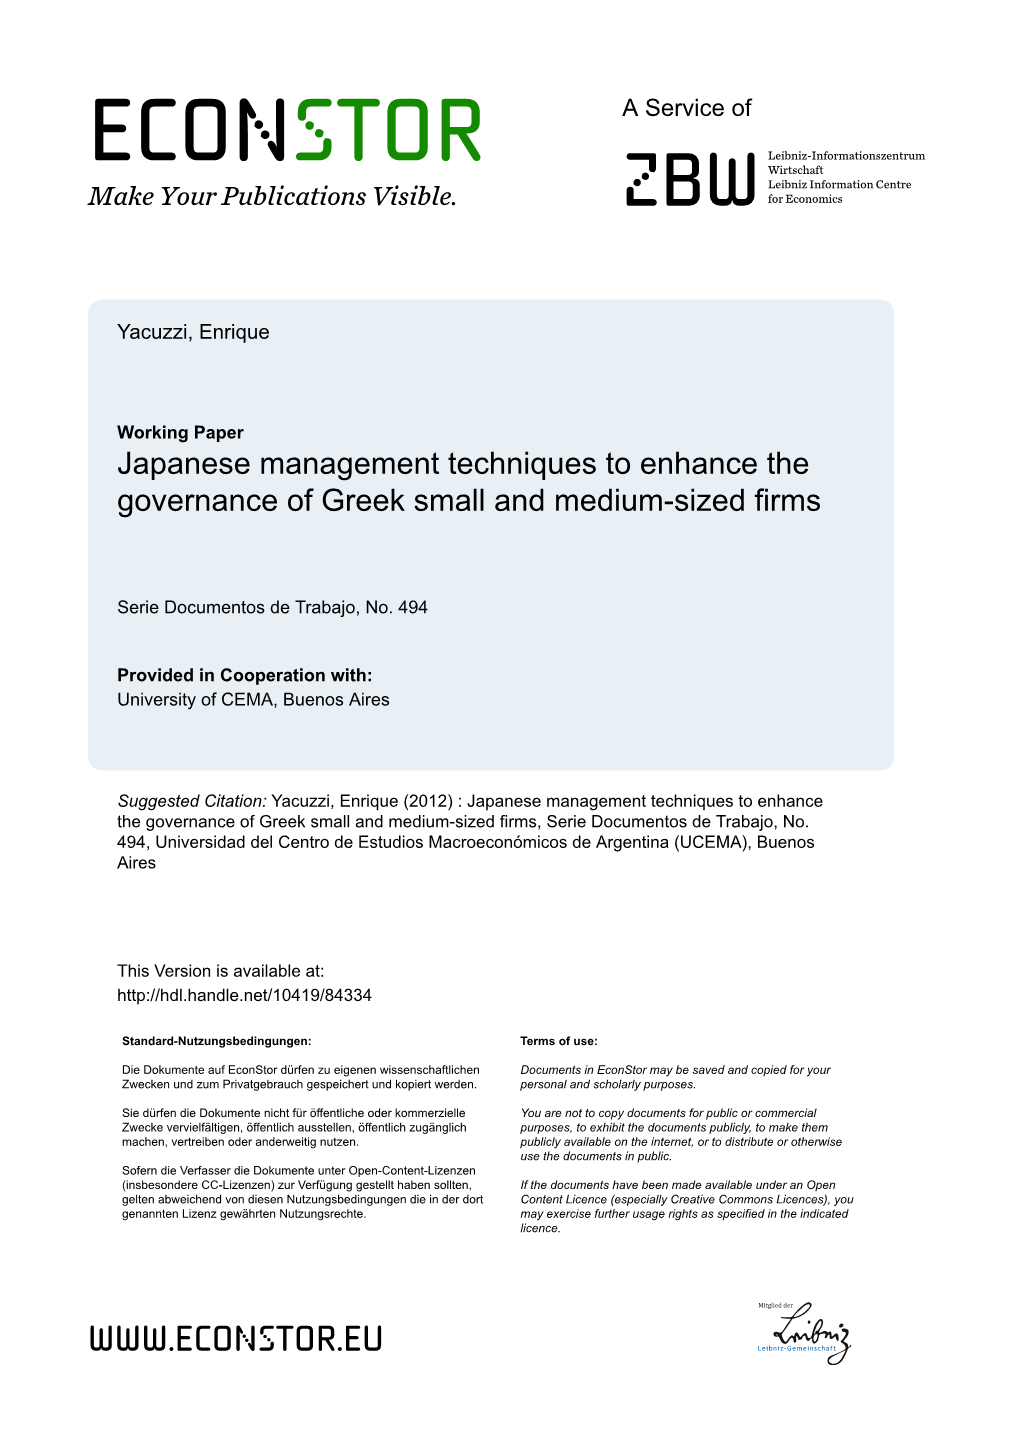 Japanese Management Techniques to Enhance the Governance of Greek Small and Medium-Sized Firms